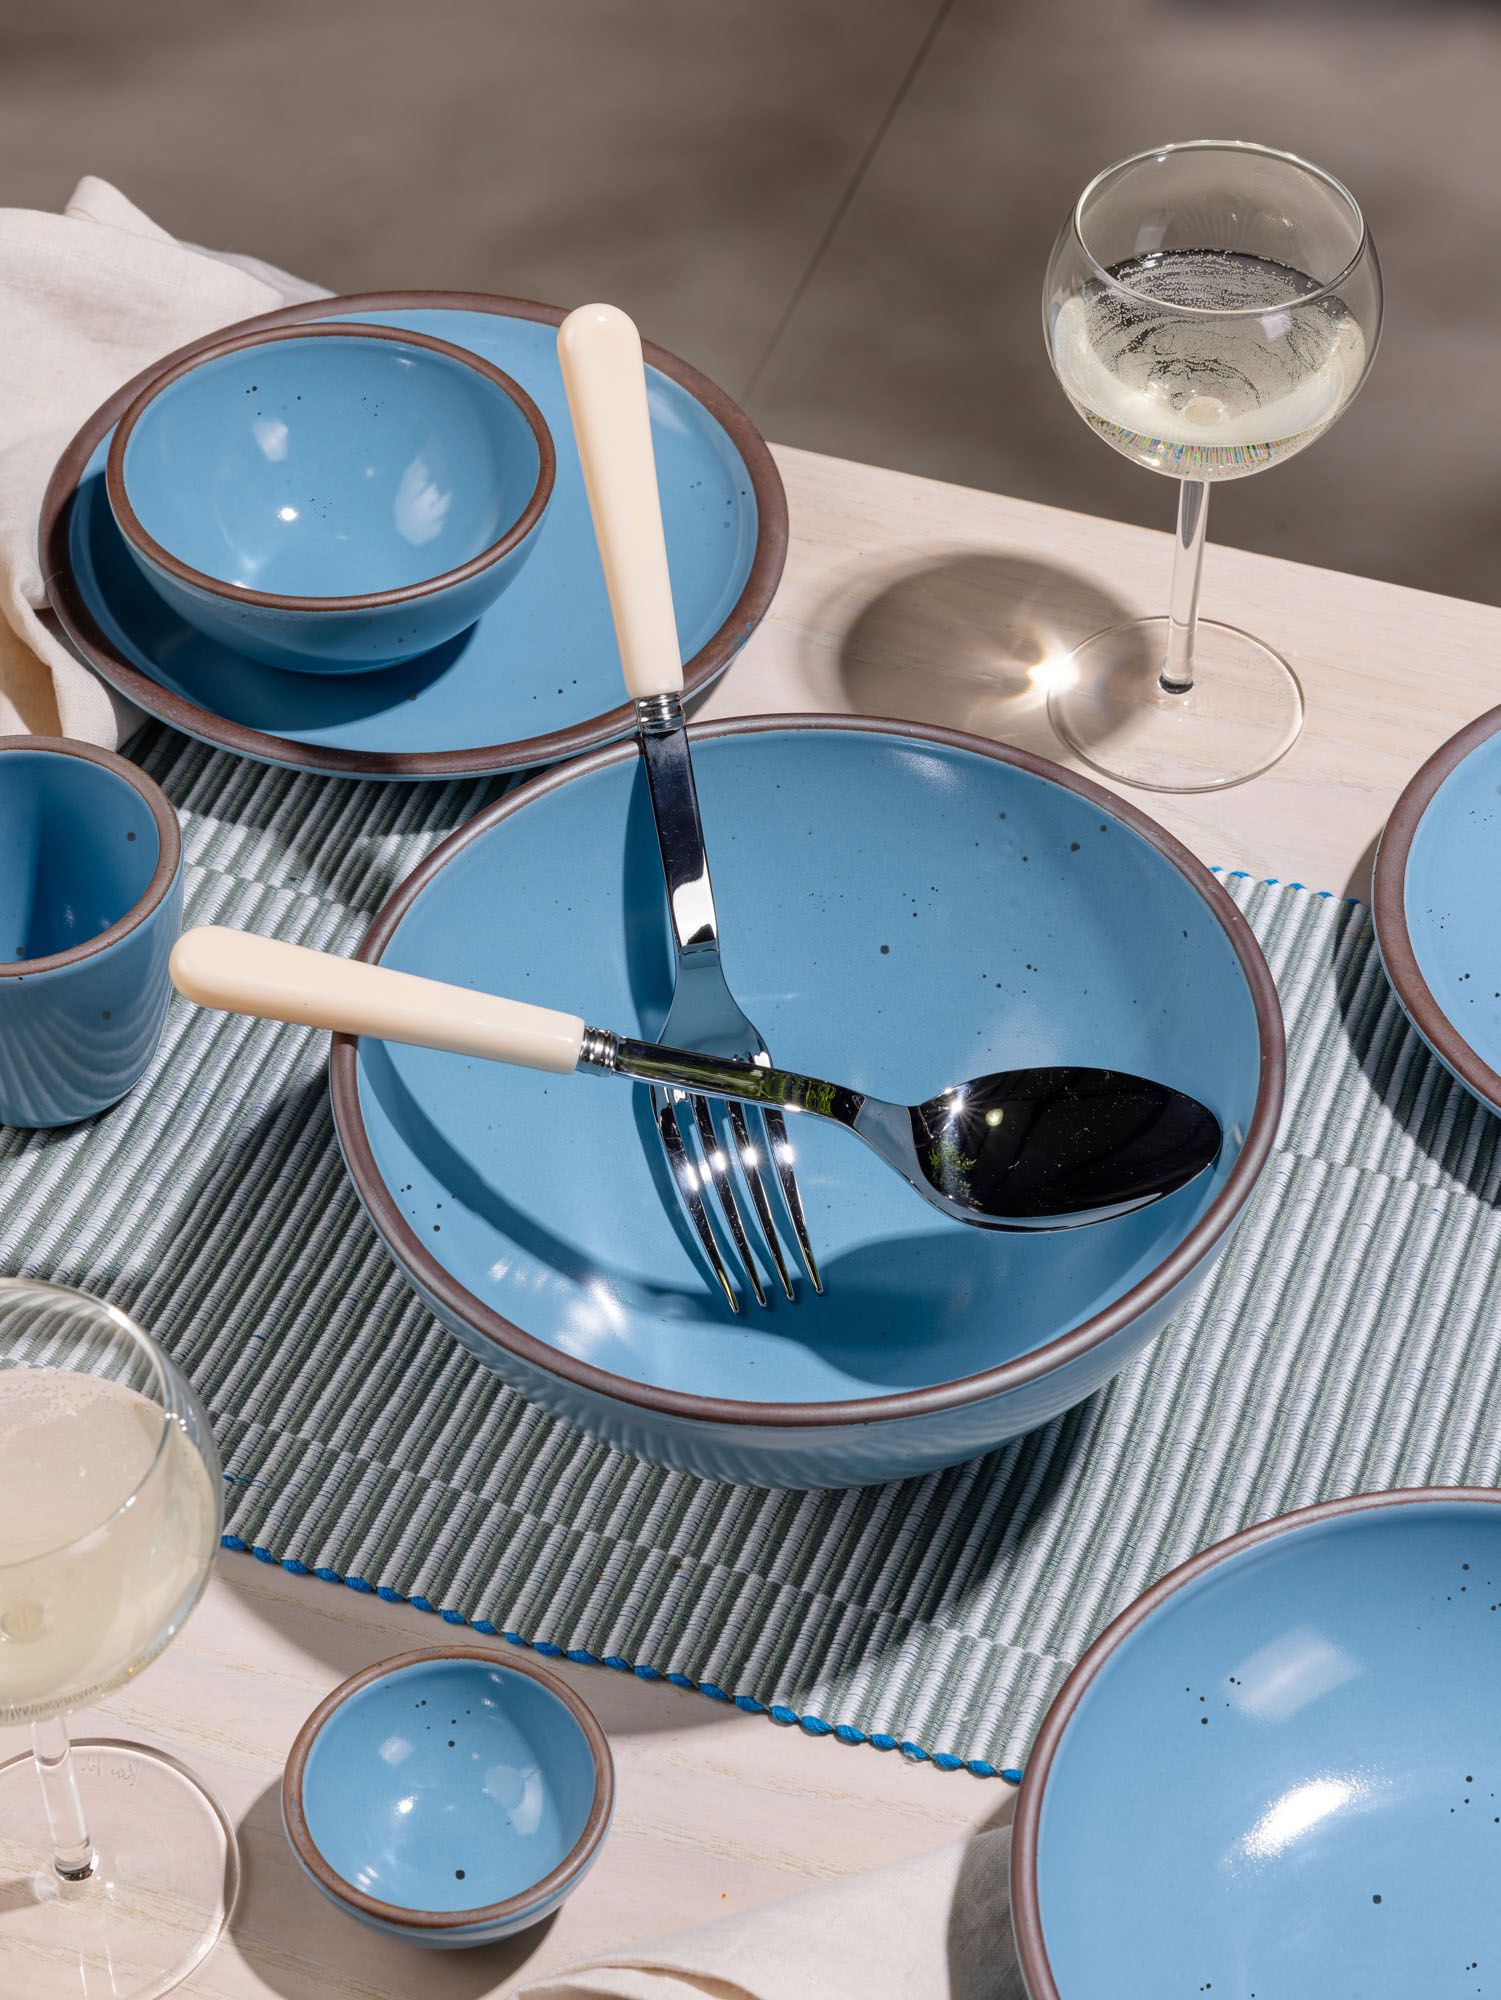 A large fork and spoon with cream handles sit inside a ceramic bowl in a robin's egg blue color. Other bowls of various sizes surround.